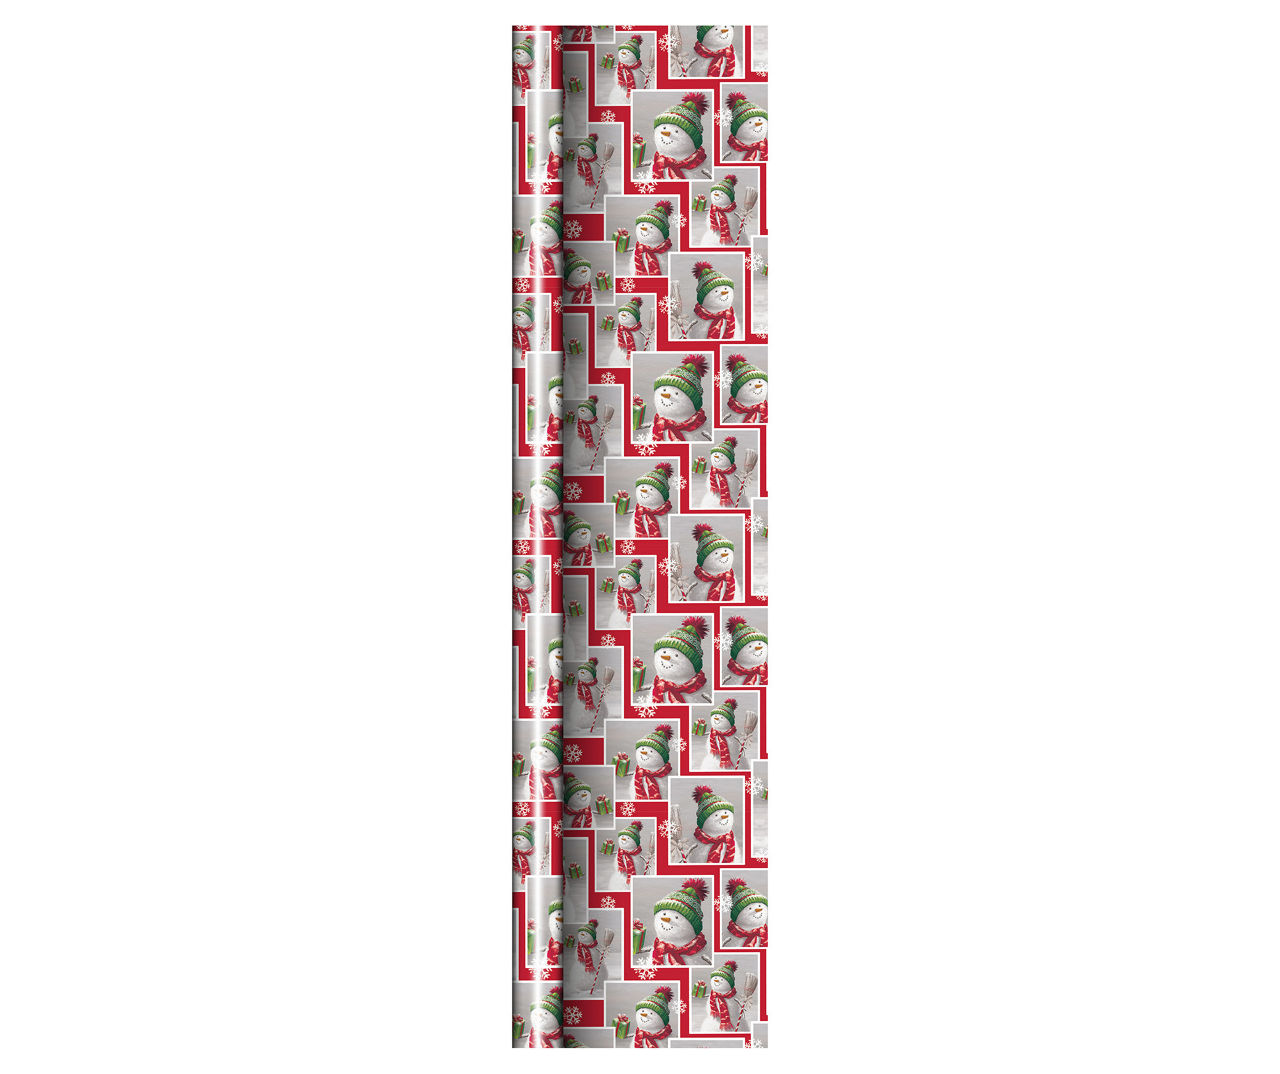 Christmas With Bacon Wrapping Paper | Zazzle